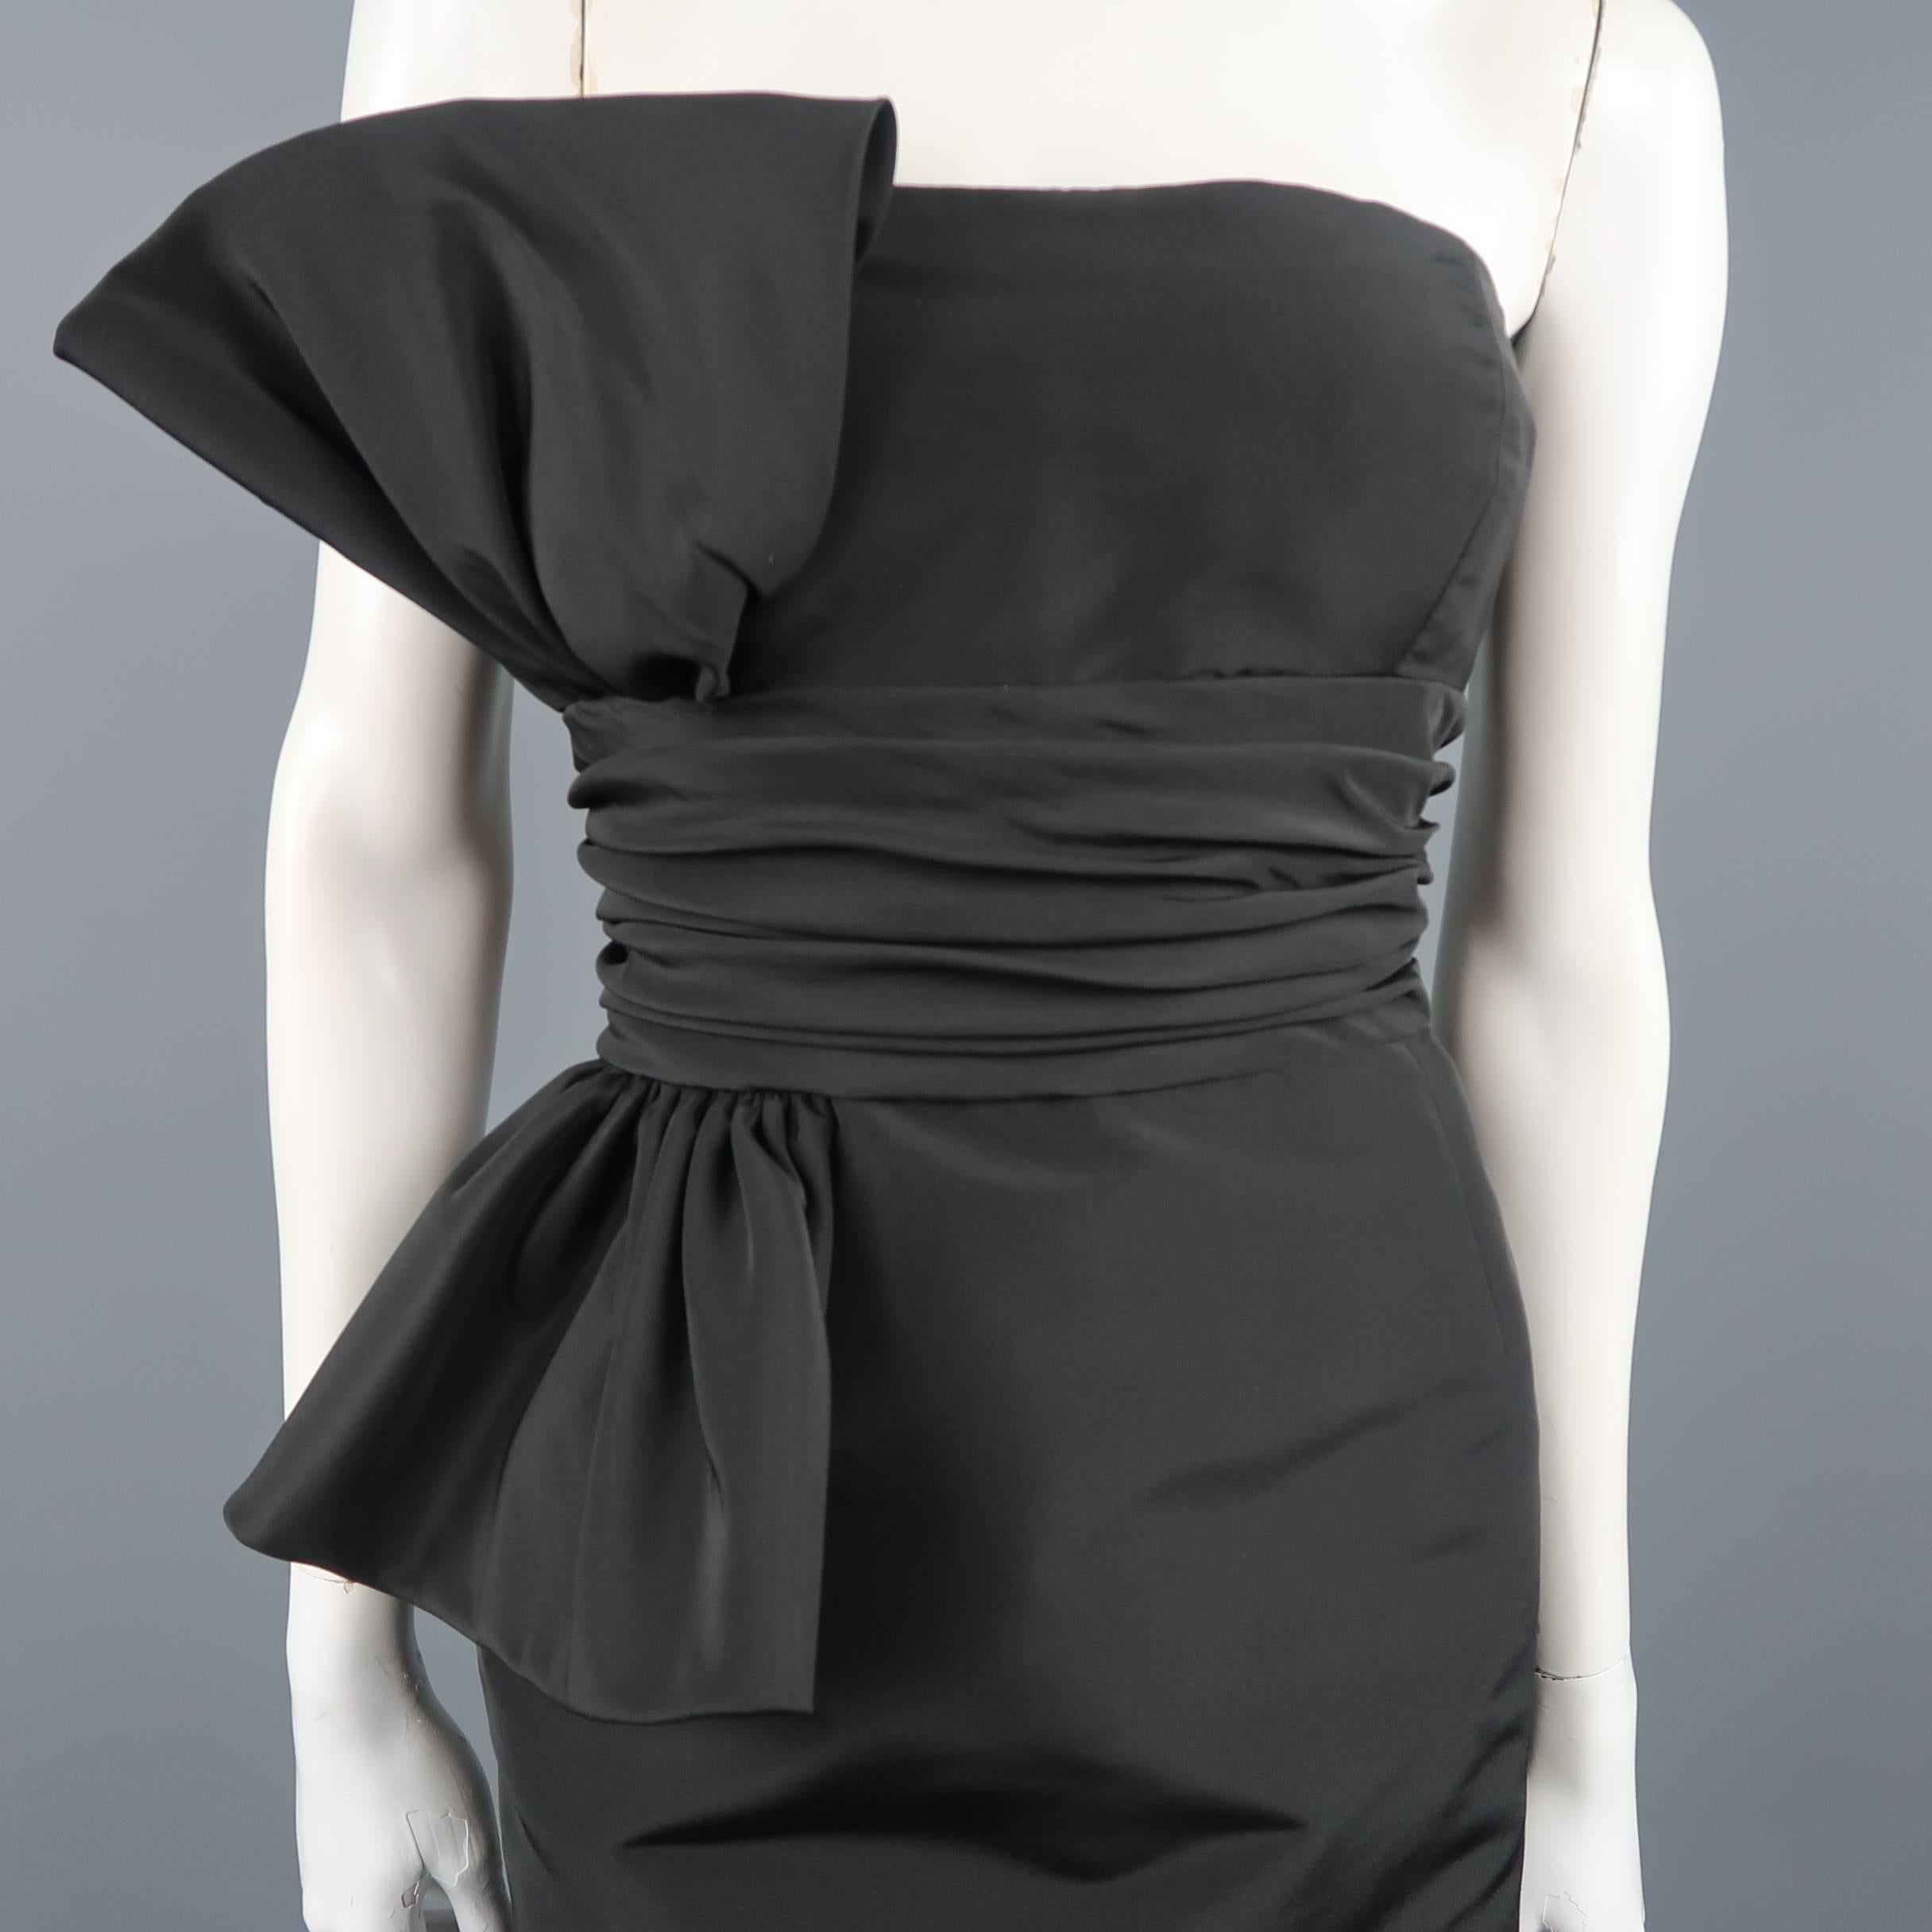 OSCAR DE LA RENTA cocktail dress comes in black silk taffeta with a strapless neckline, pleated waistband, and sash bow detail. Built in bustier. Made in USA.
 
Excellent Pre-Owned Condition.
Marked: 6
 
Measurements:
 
Bust: 35 in.
Waist: 26